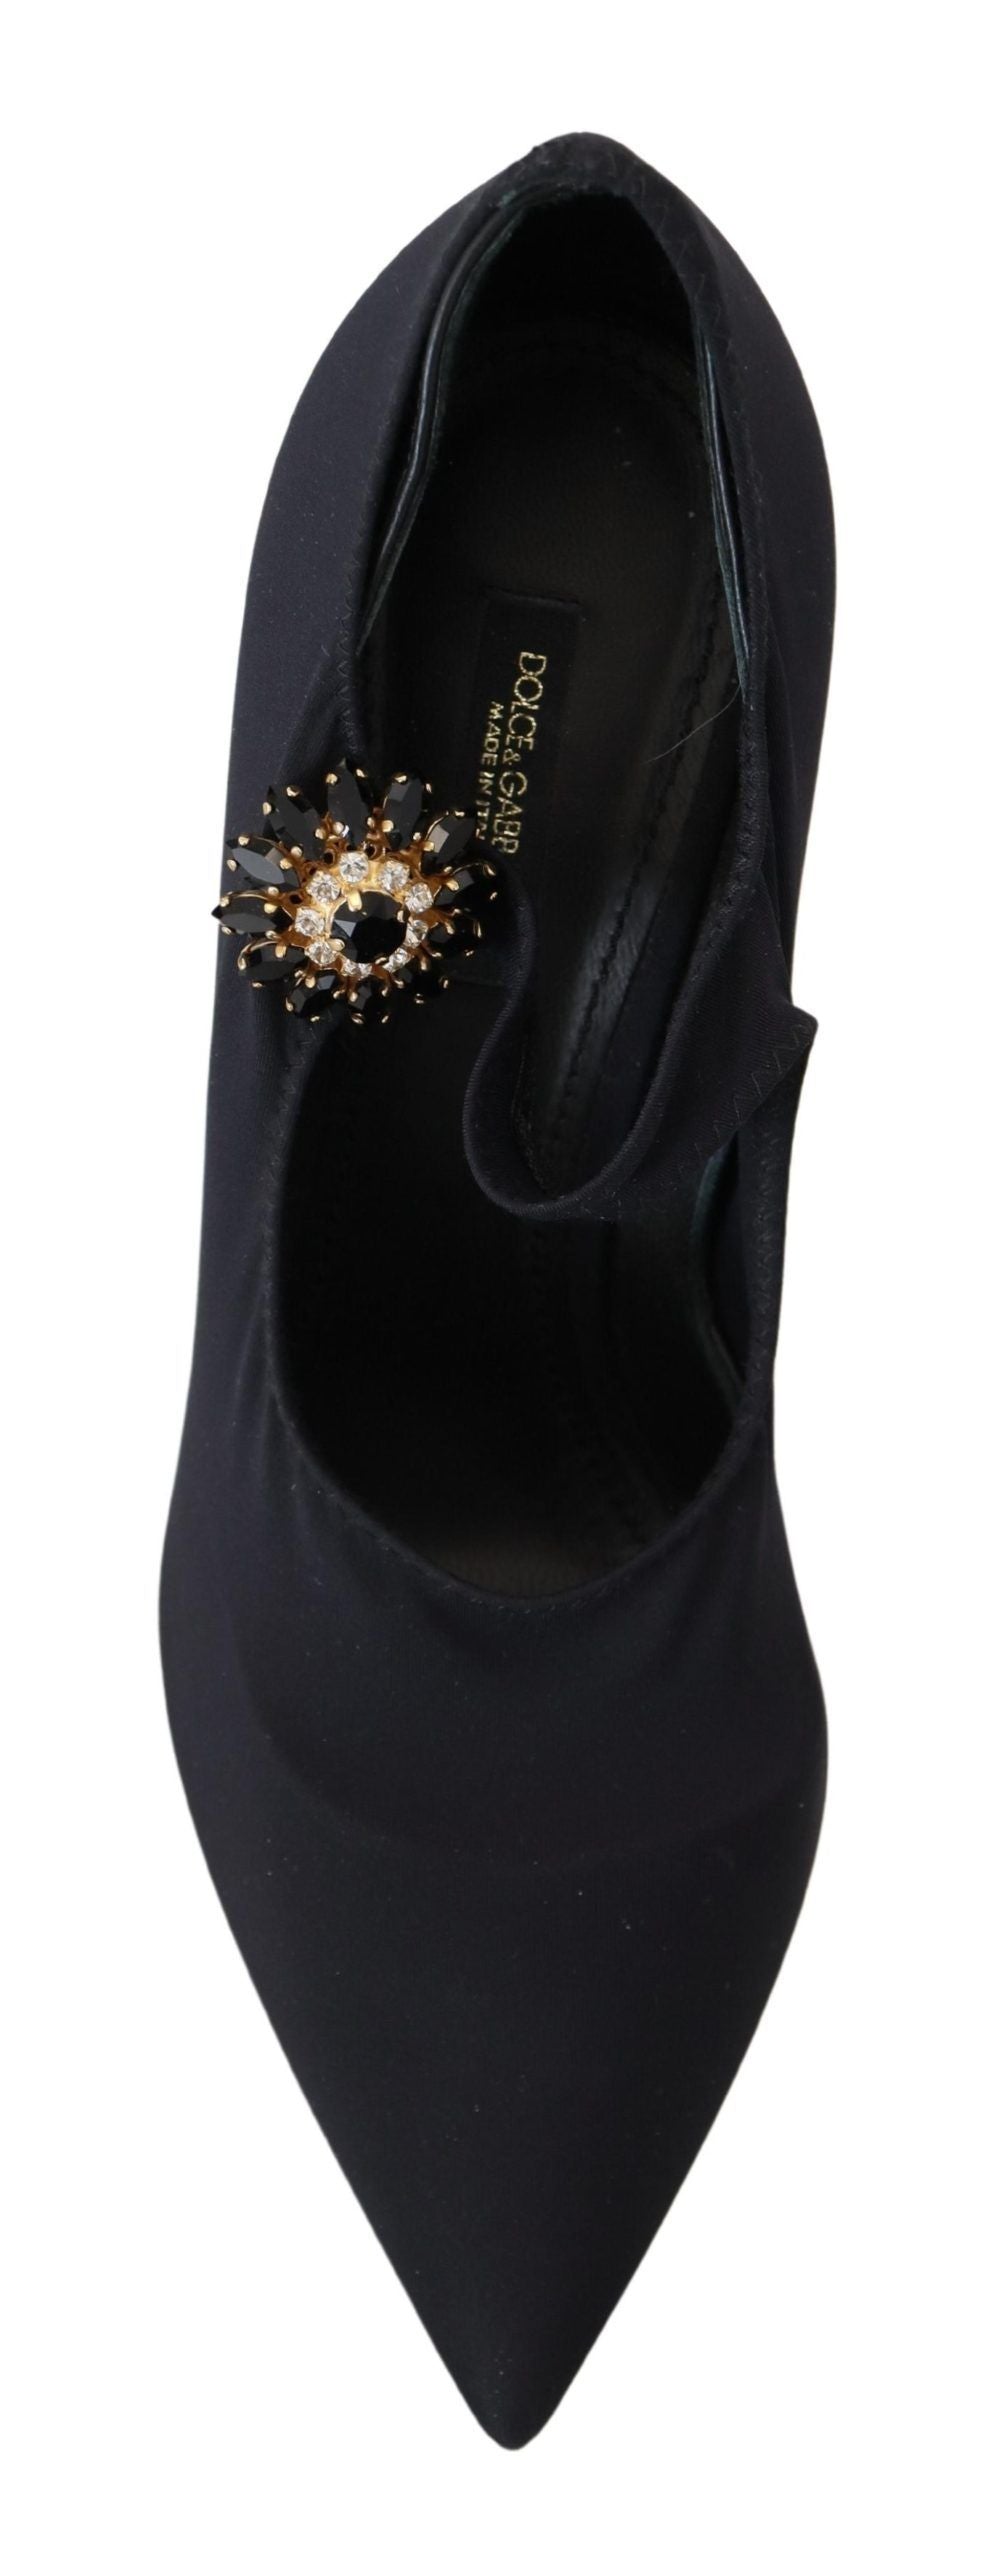 Dolce & Gabbana Chic Black Mary Jane Sock Pumps with Crystals